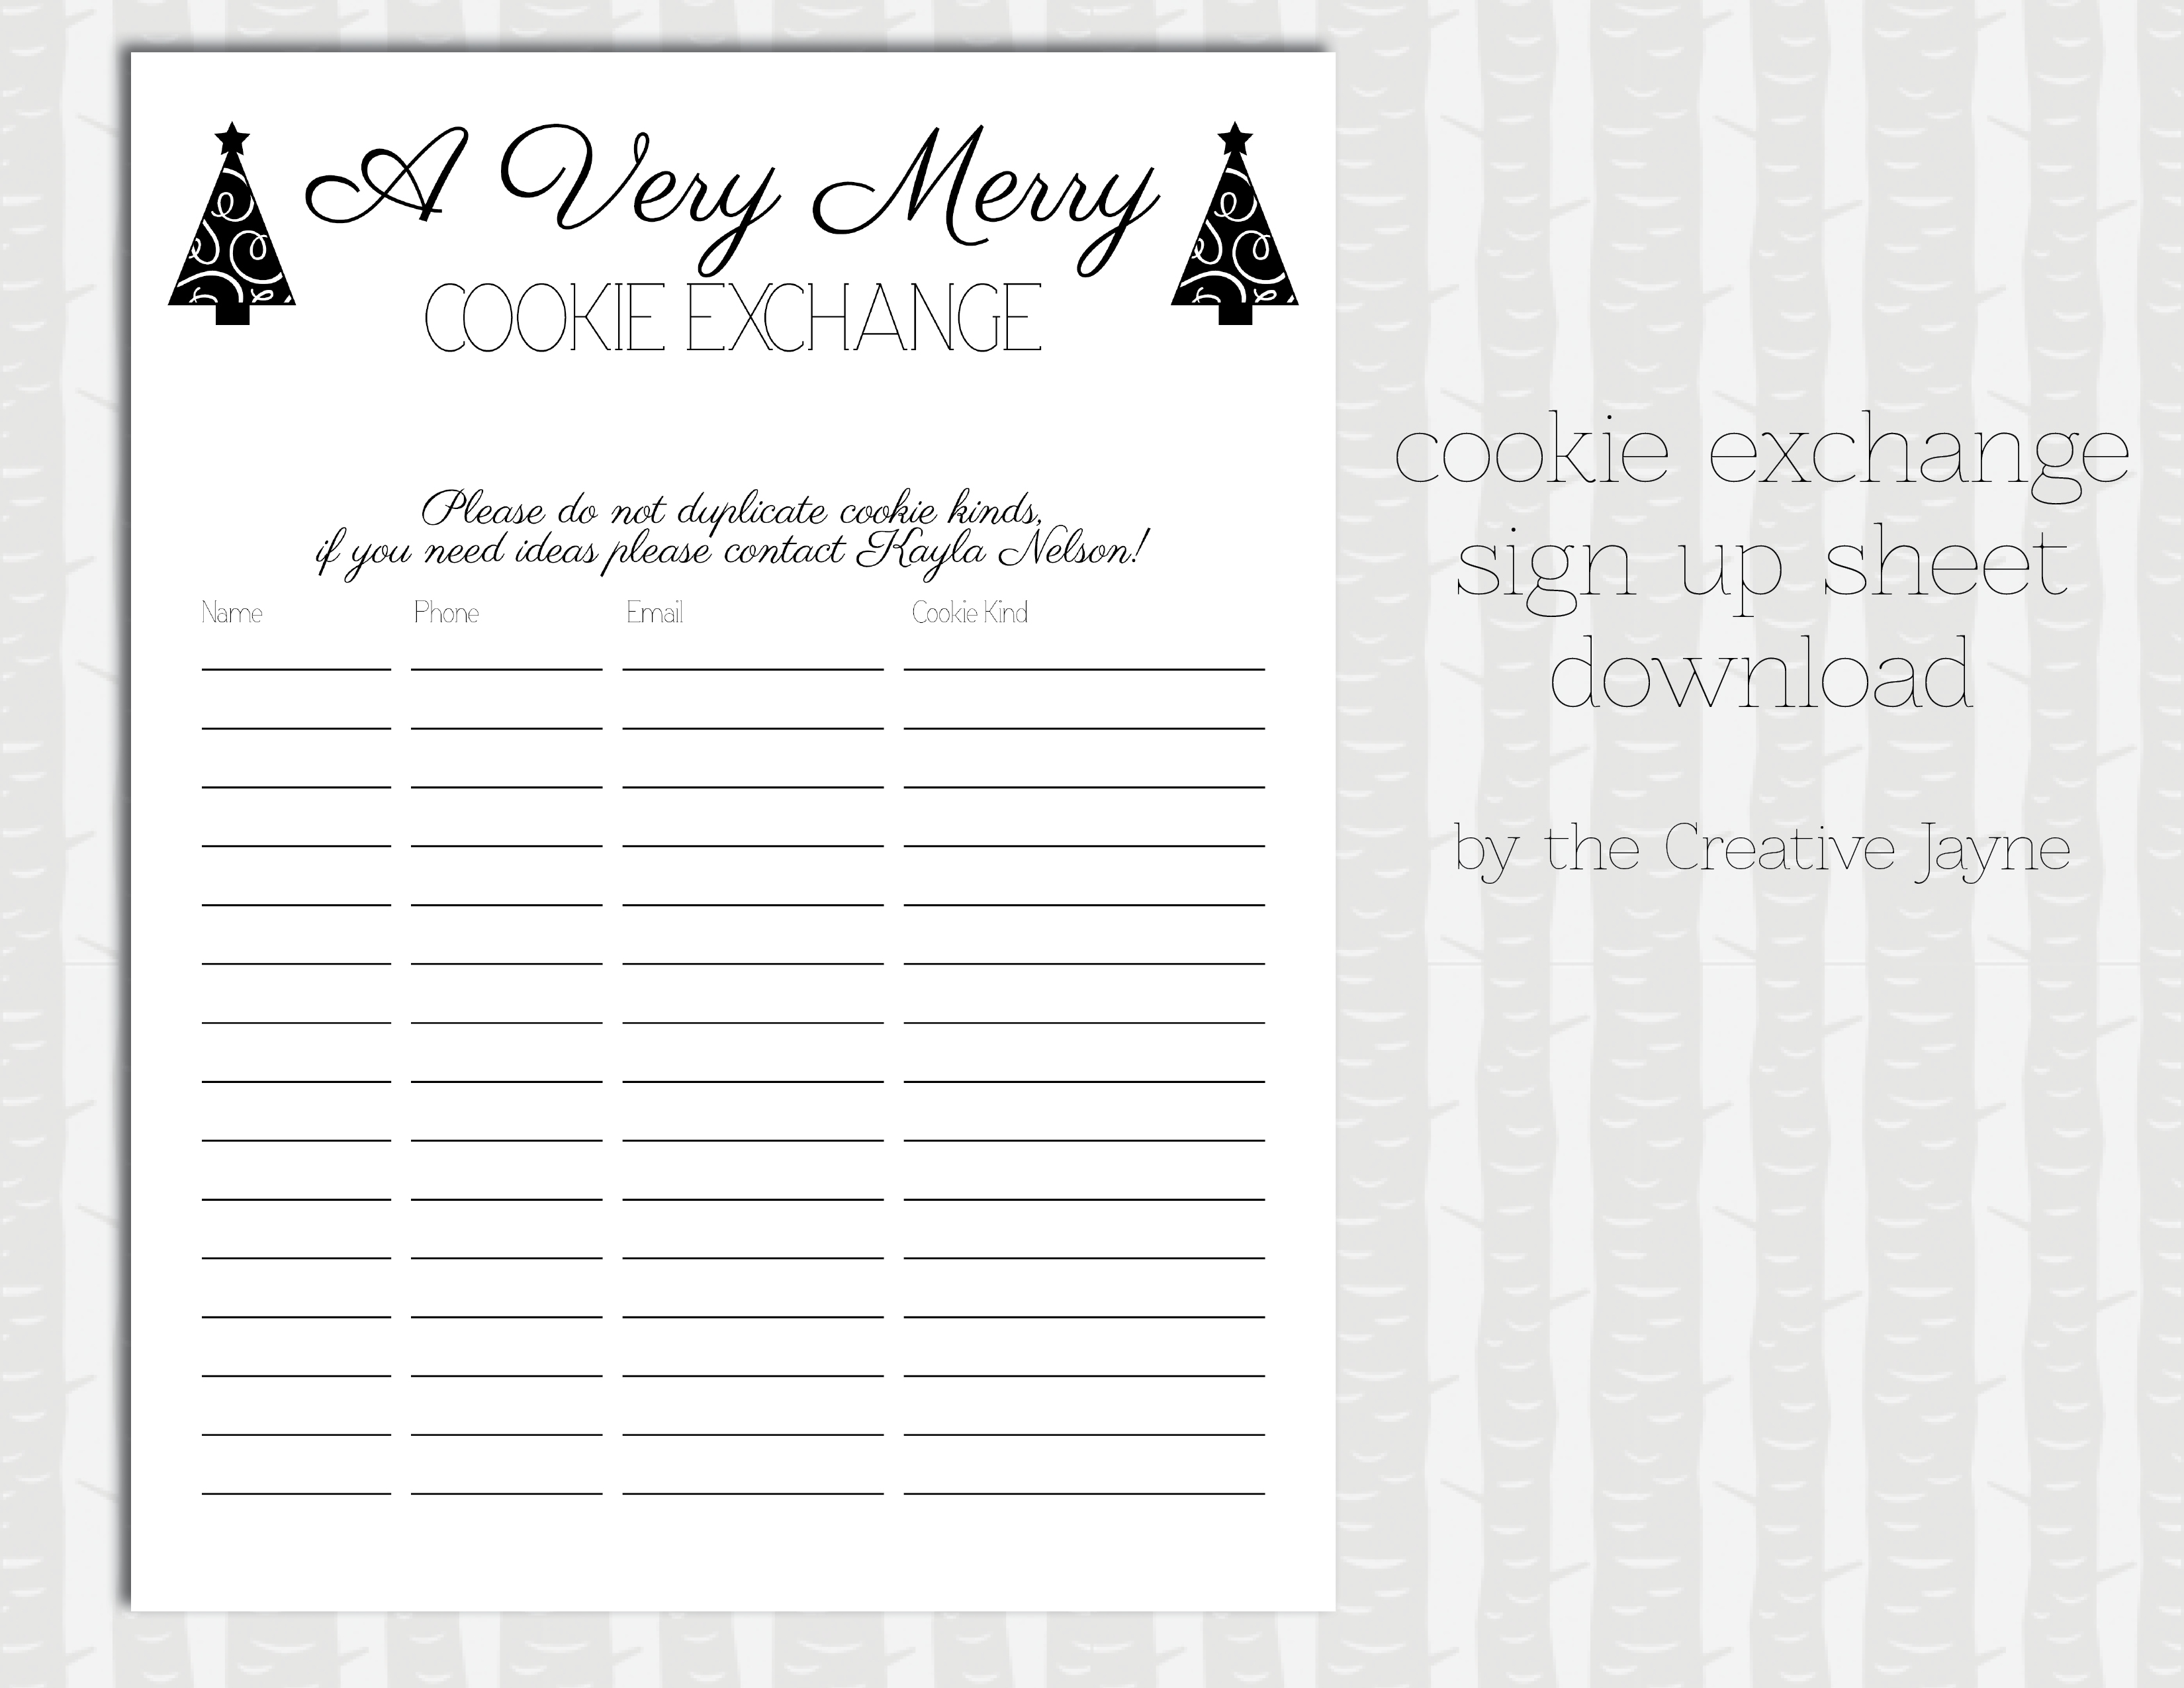 cookie exchange sign up sheet by the creative jayne